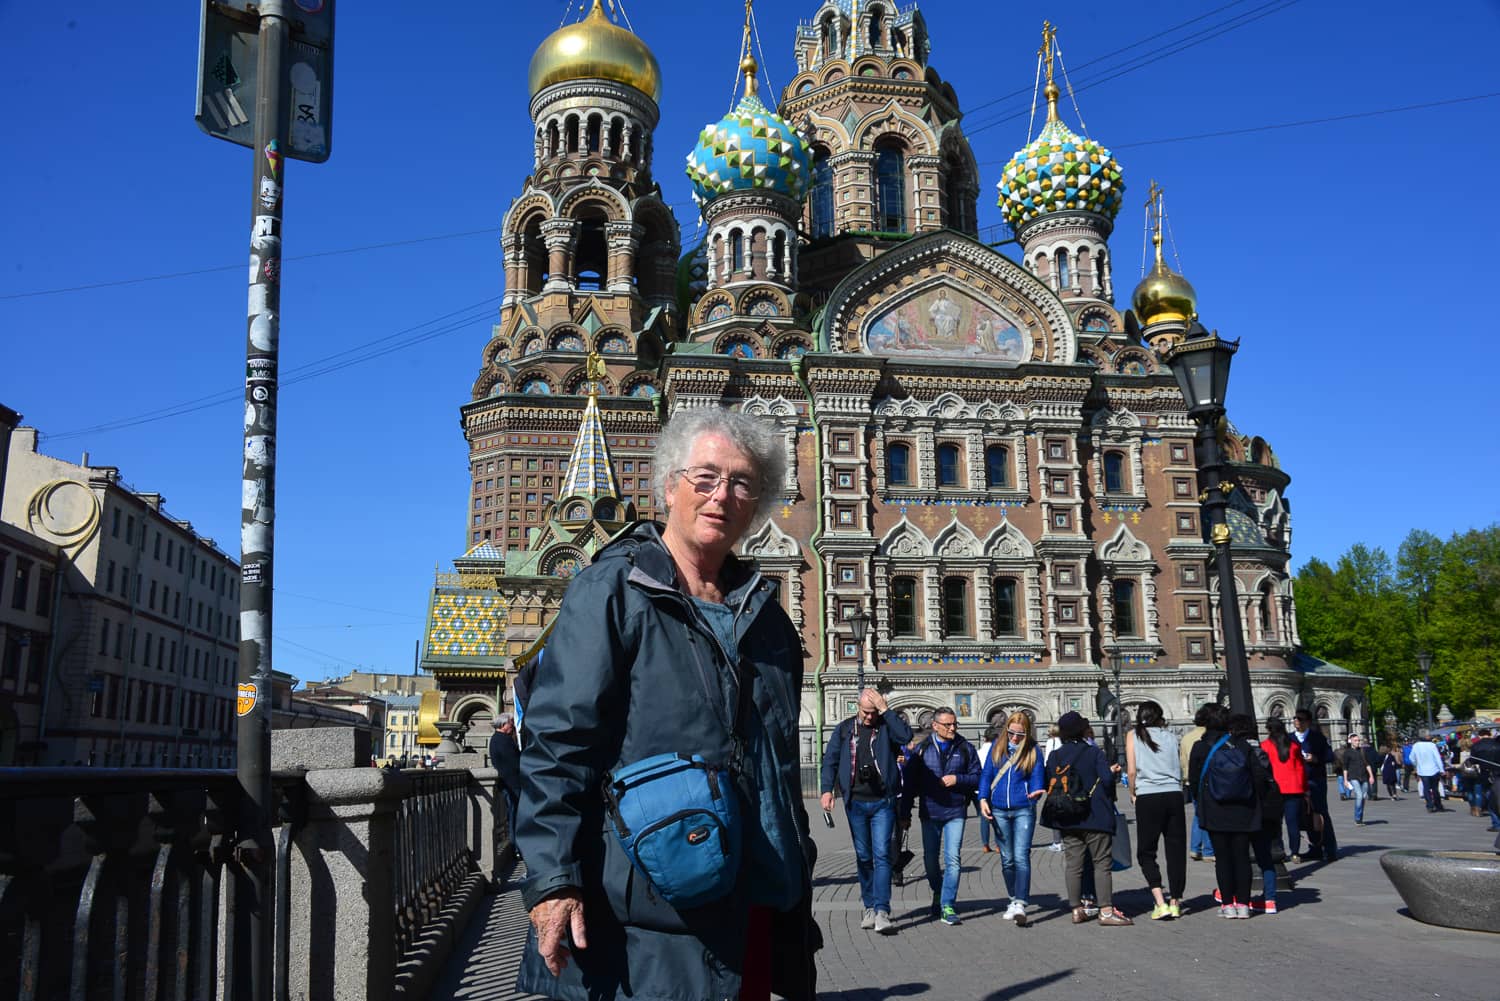 Ambition realised. Jacqui in front of the Church of the Savior of Spilled Blood.